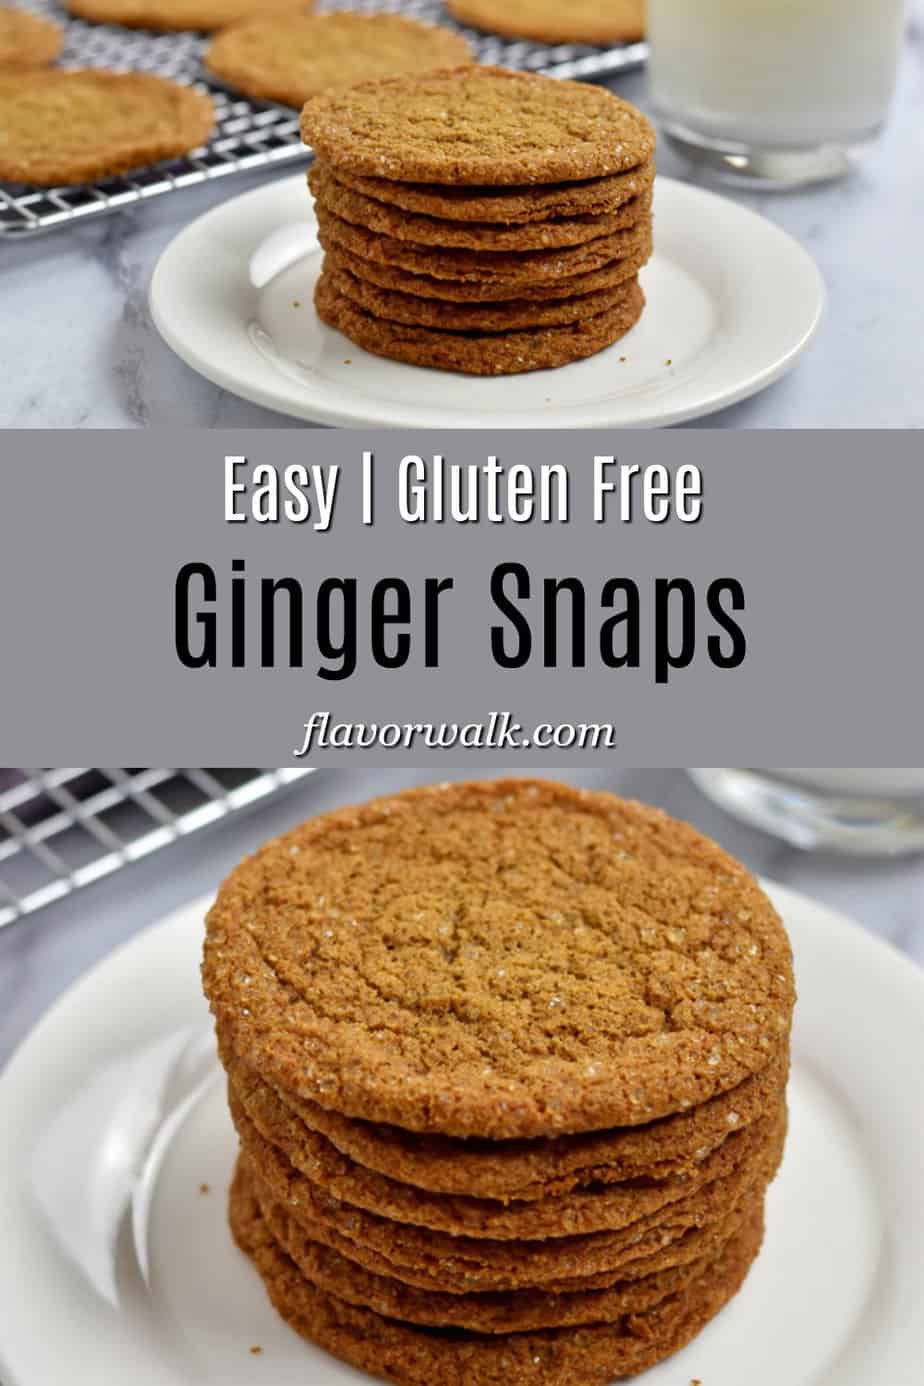 These Gluten Free Ginger Snaps are crisp around the edges, soft and chewy in the middle, and filled with bold flavor. They are the perfect cookie any time of year!